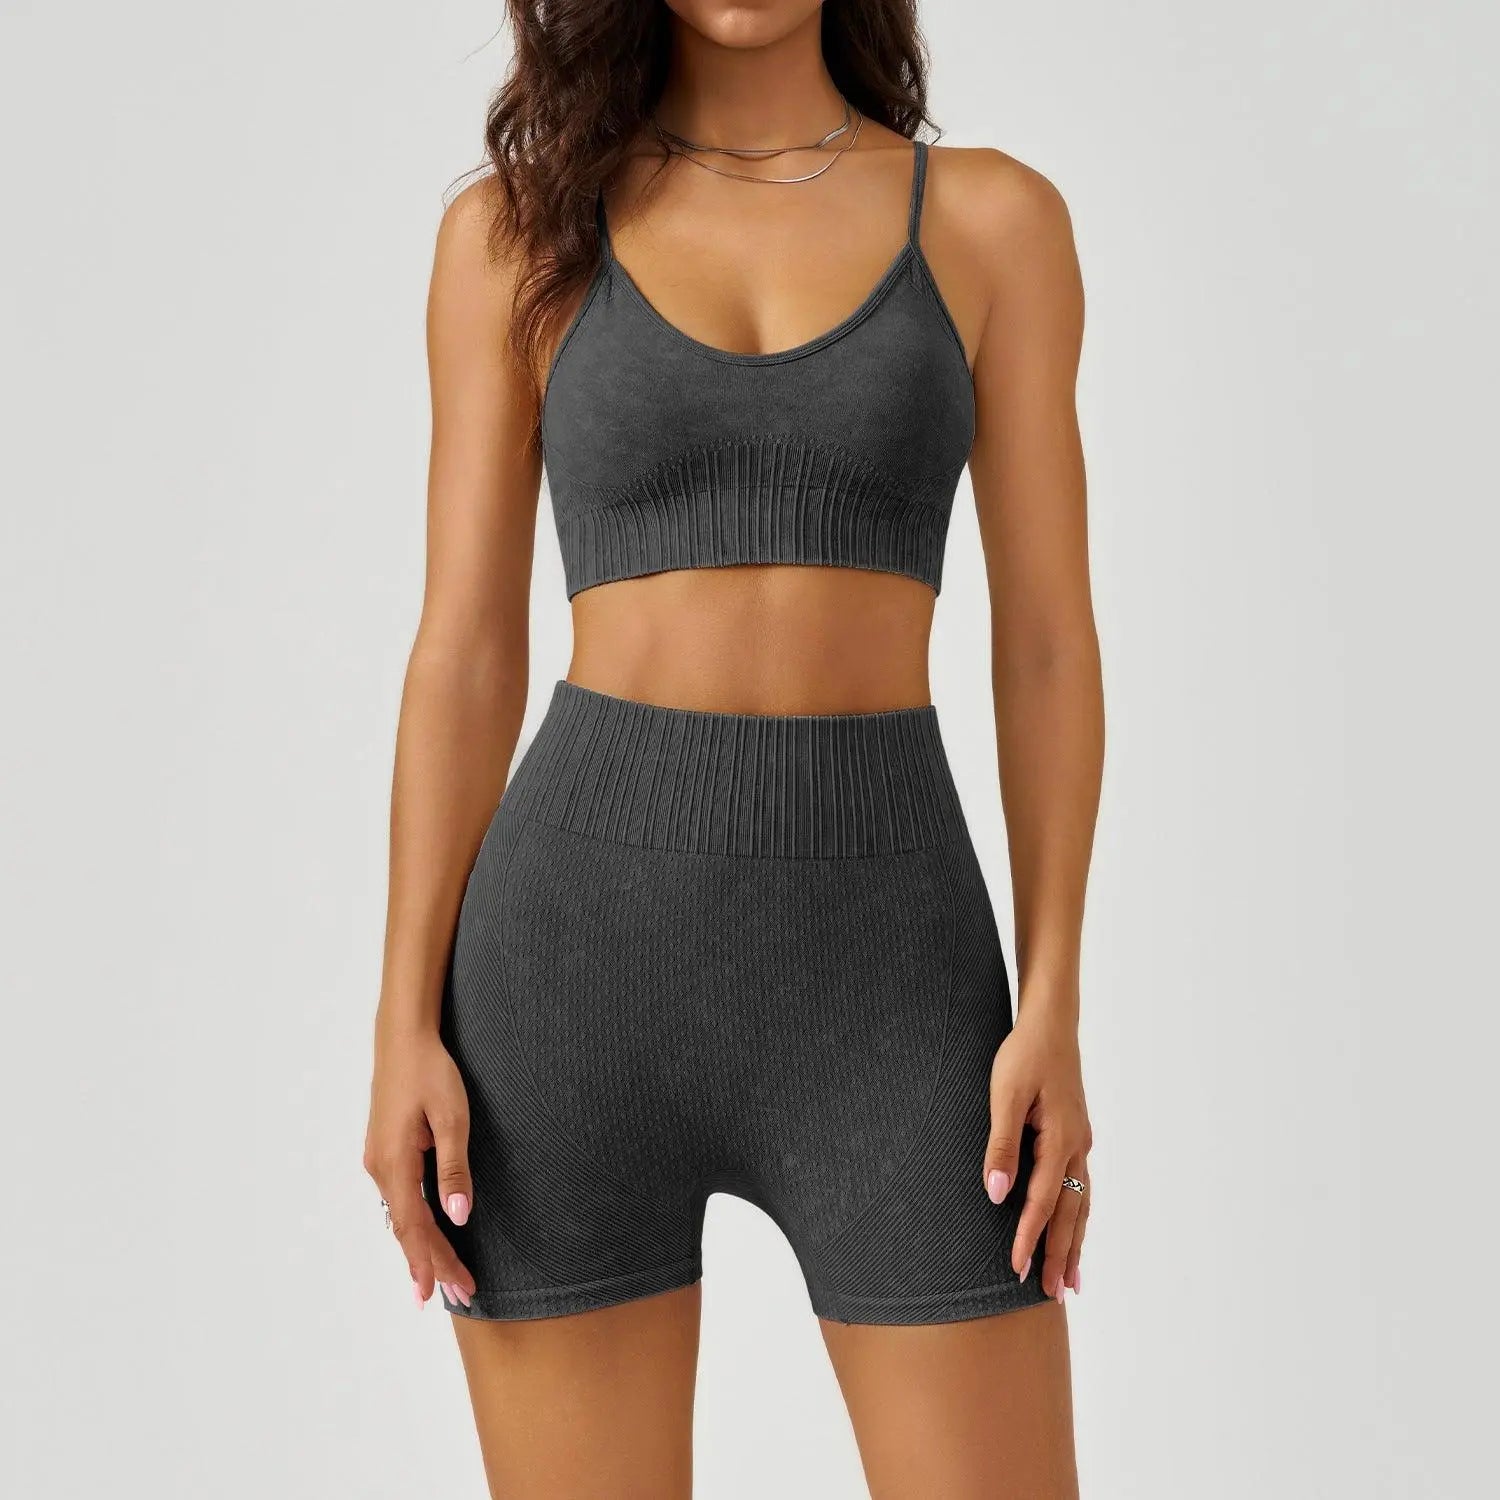 Frosted Exercise Yoga Clothes Suit - Venus Trendy Fashion Online